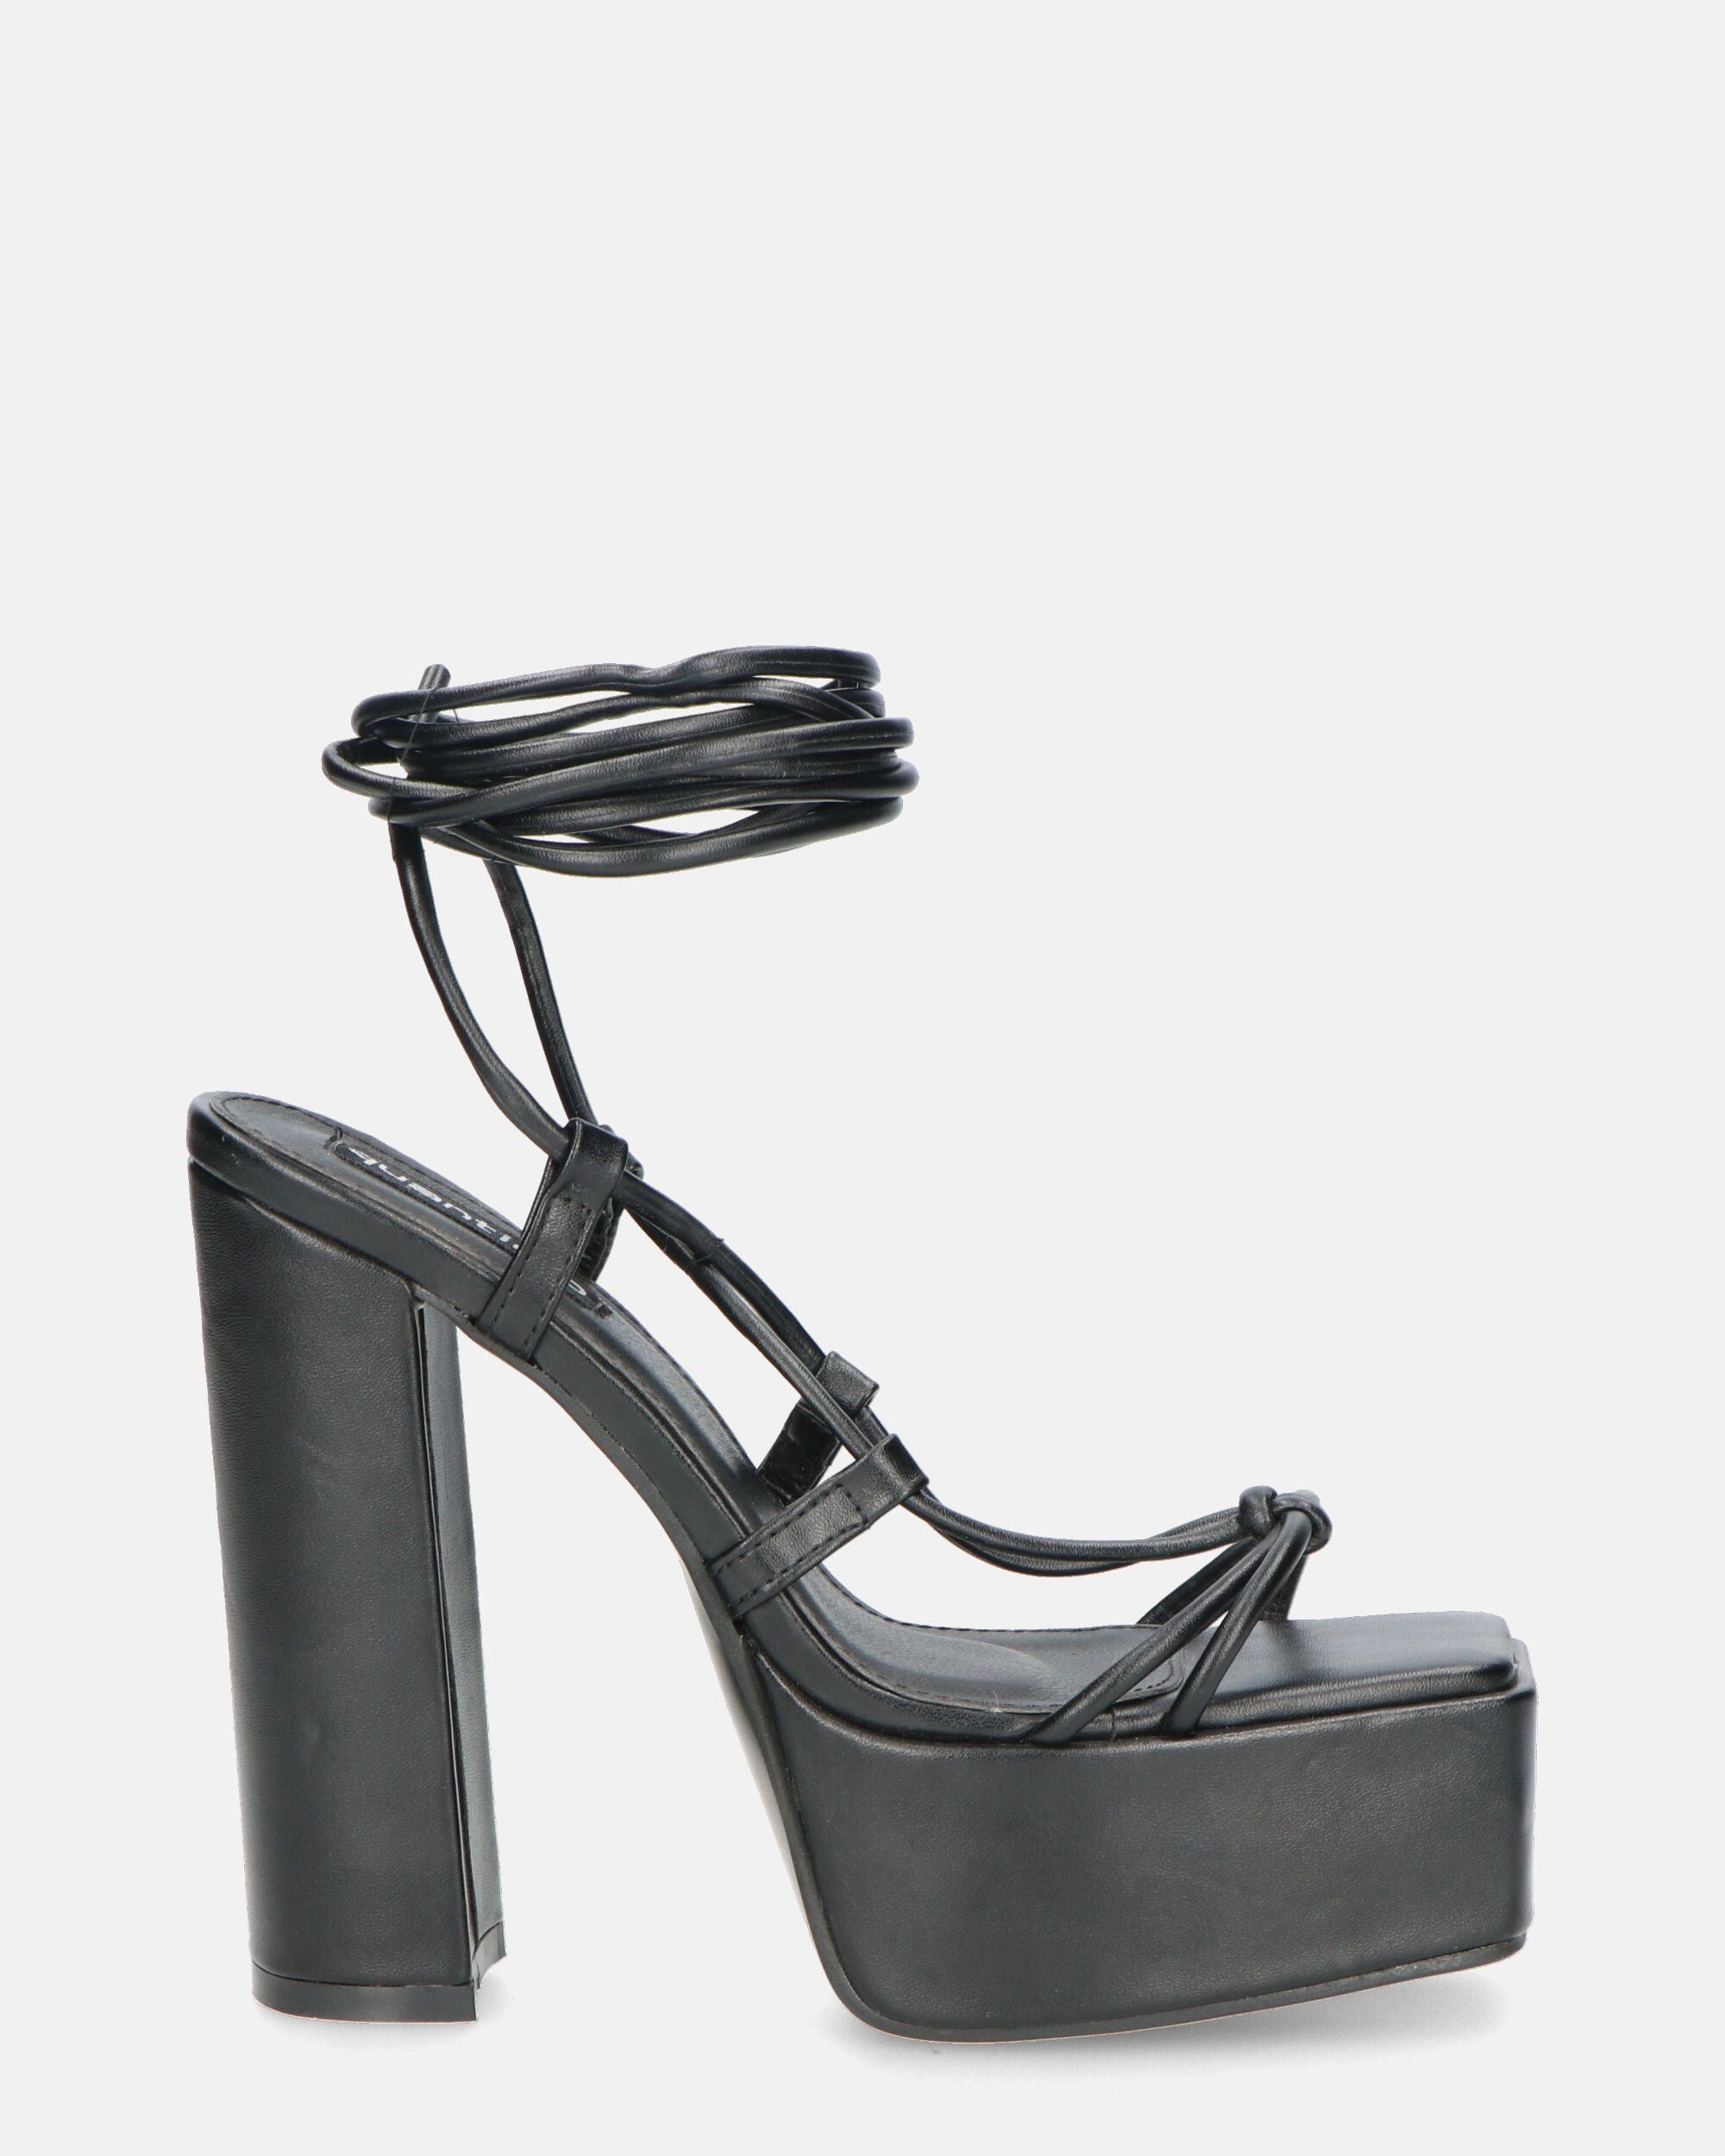 NADITZA - sandals with high heel and laces in black PU